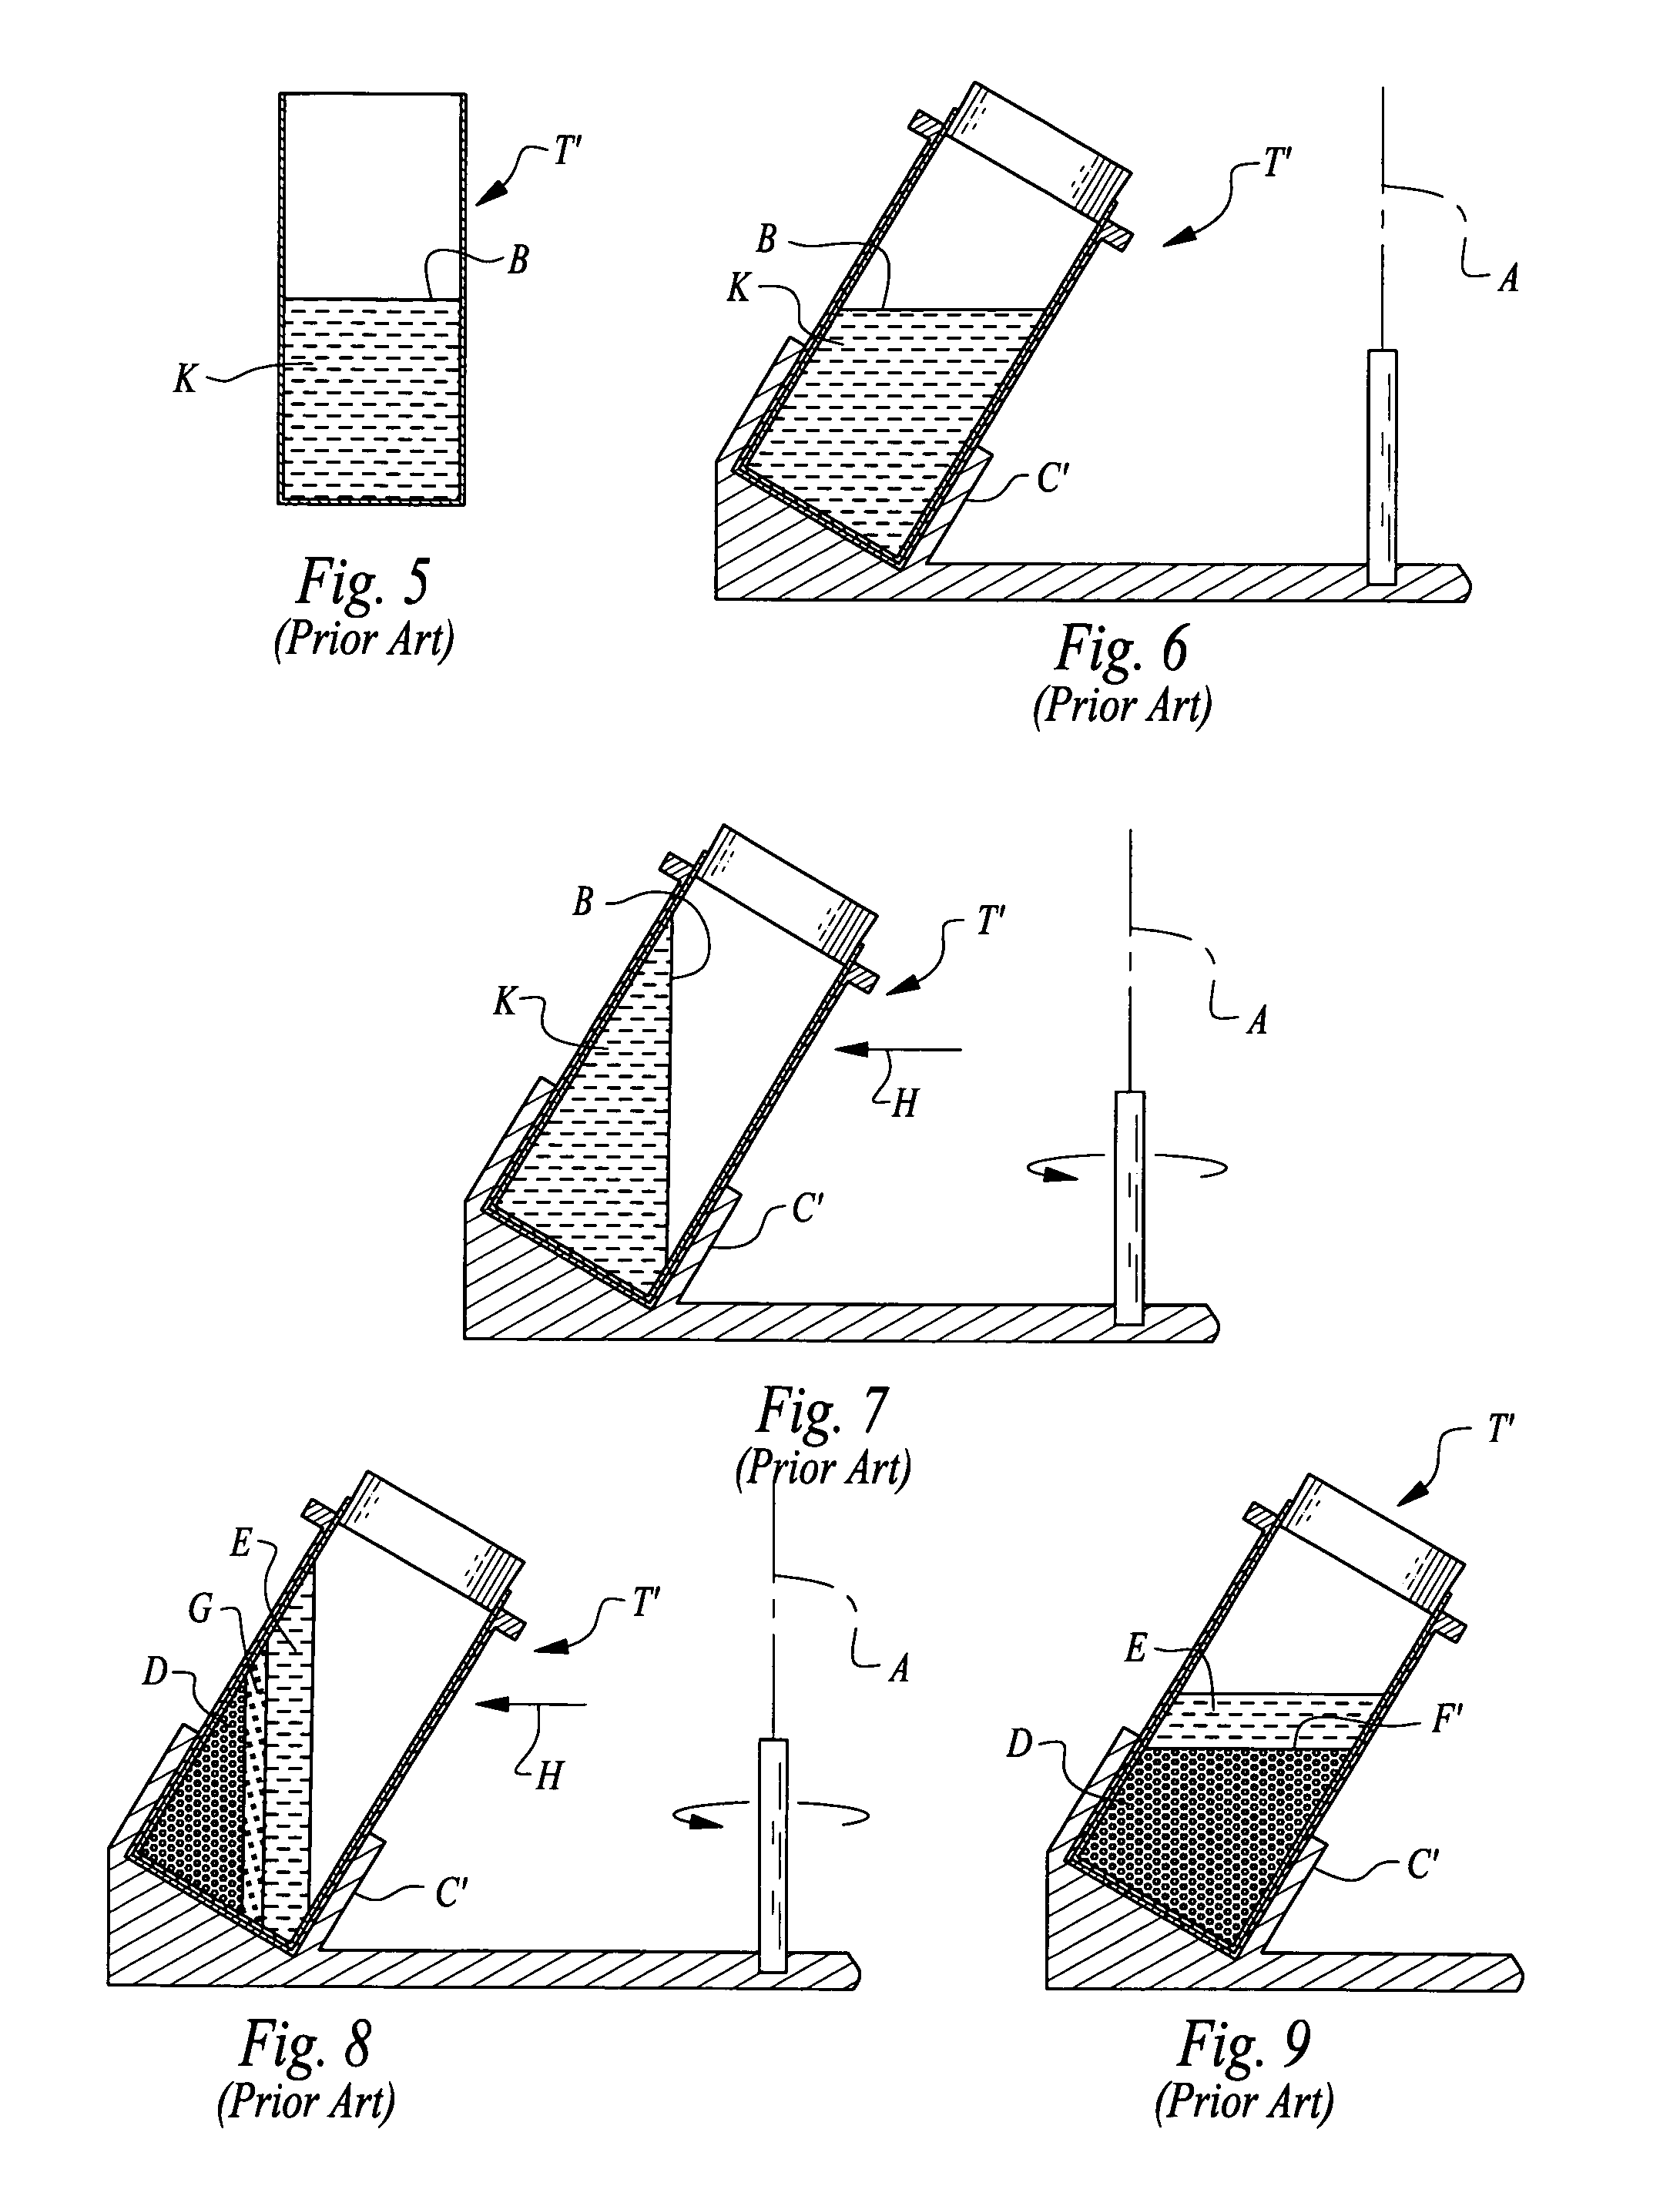 Method for separating a sample into density specific fractions